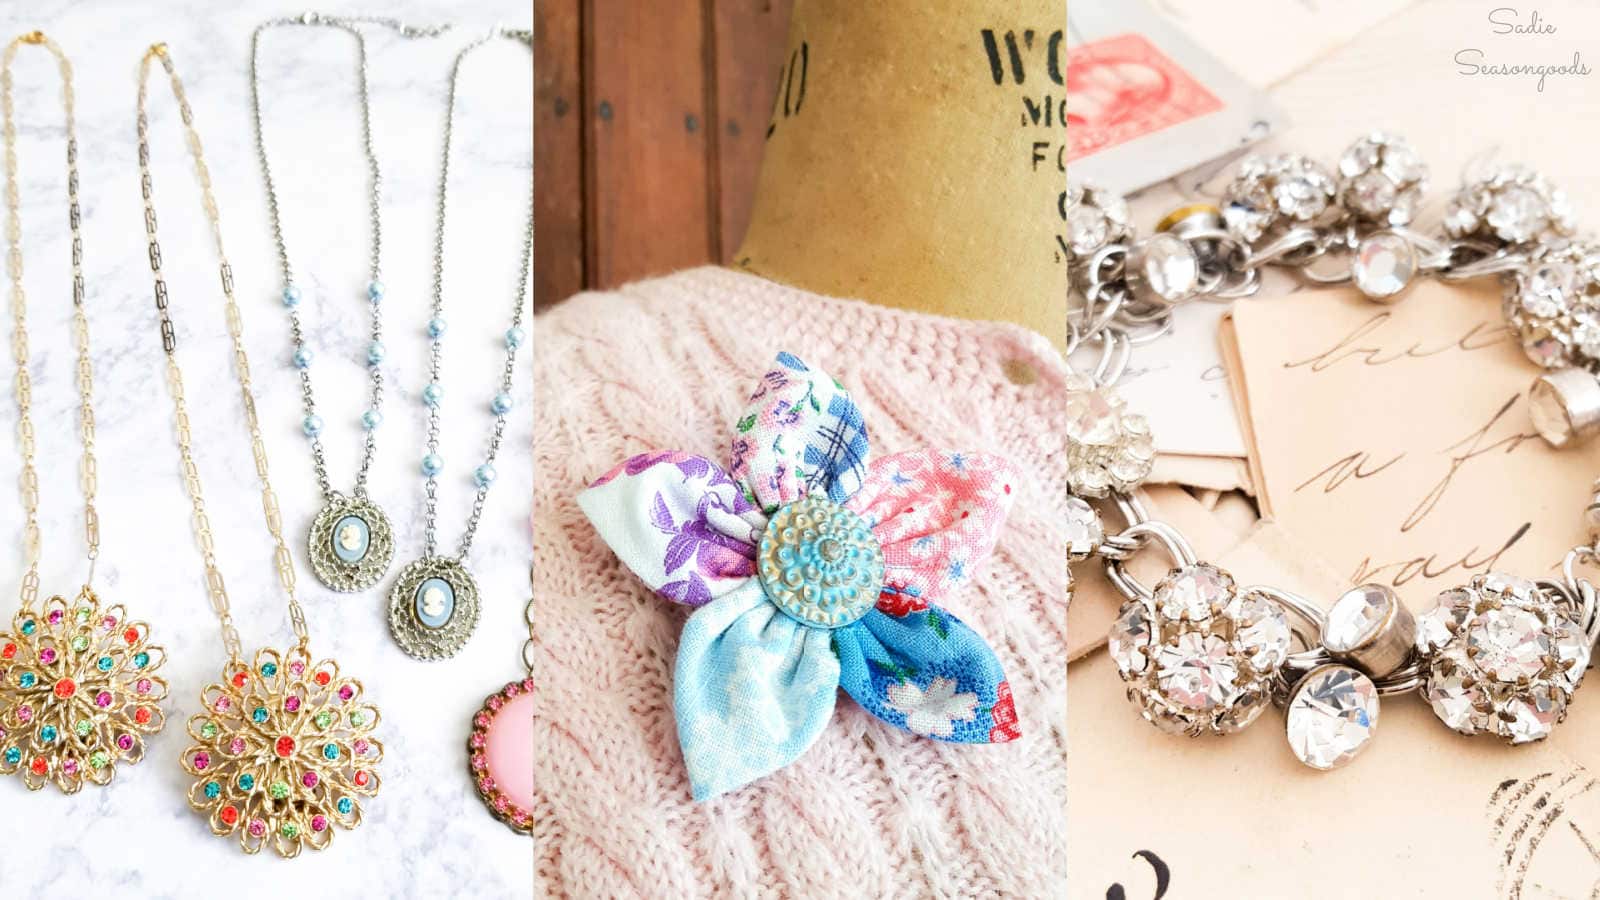 Repurposed Jewelry Projects for One-of-a-Kind Accessories